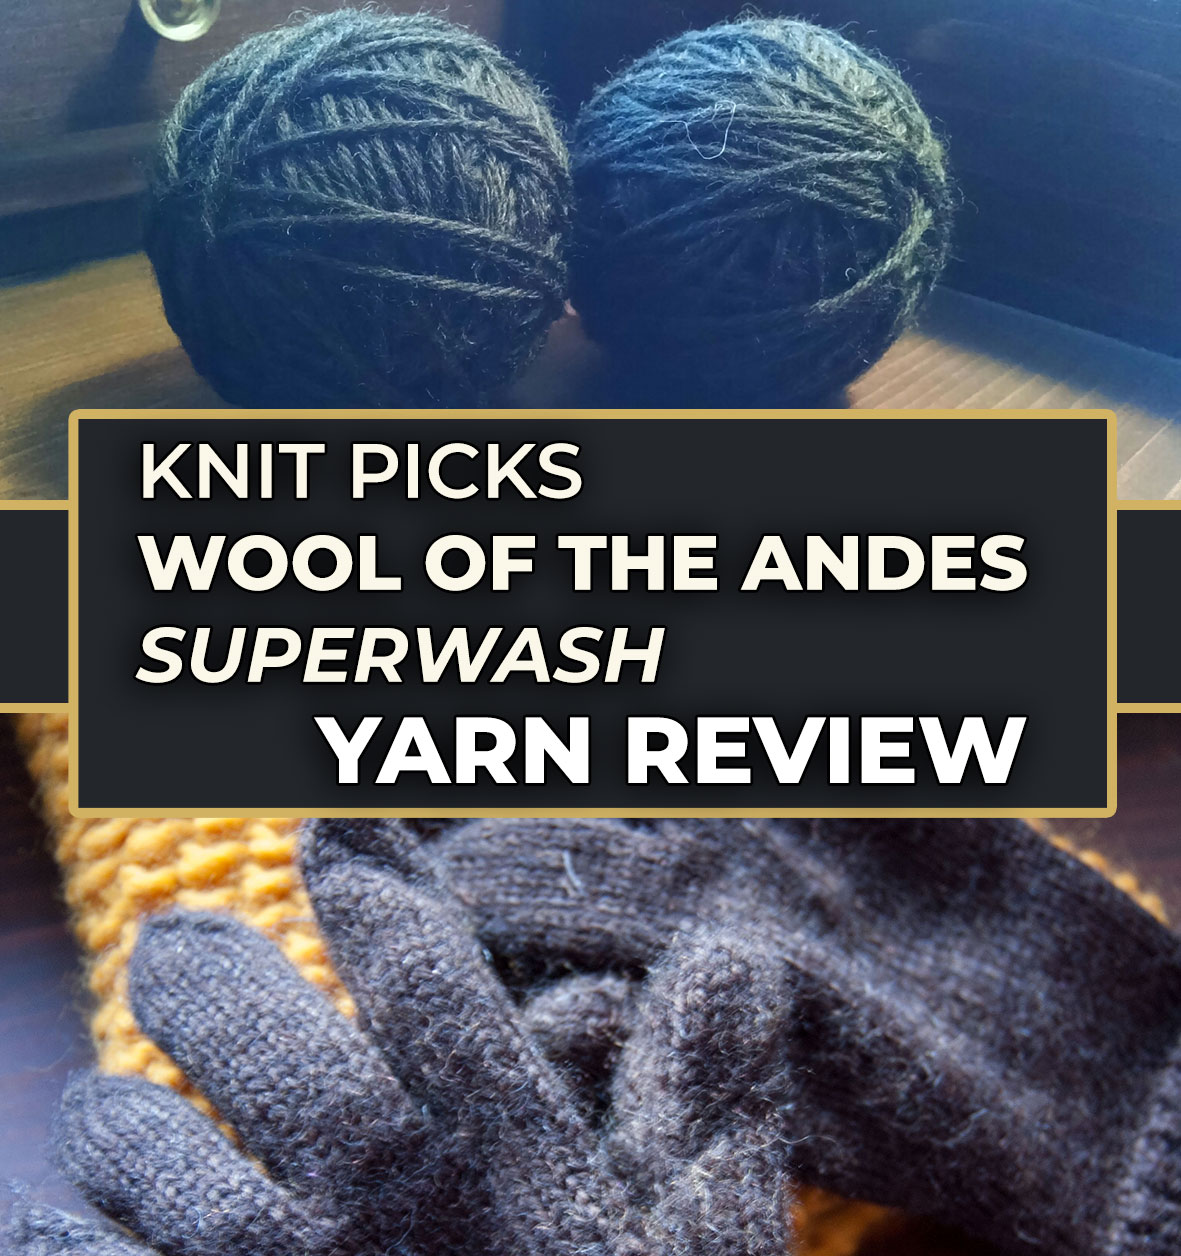 Wool of the Andes Superwash Review - Budget Yarn Reviews